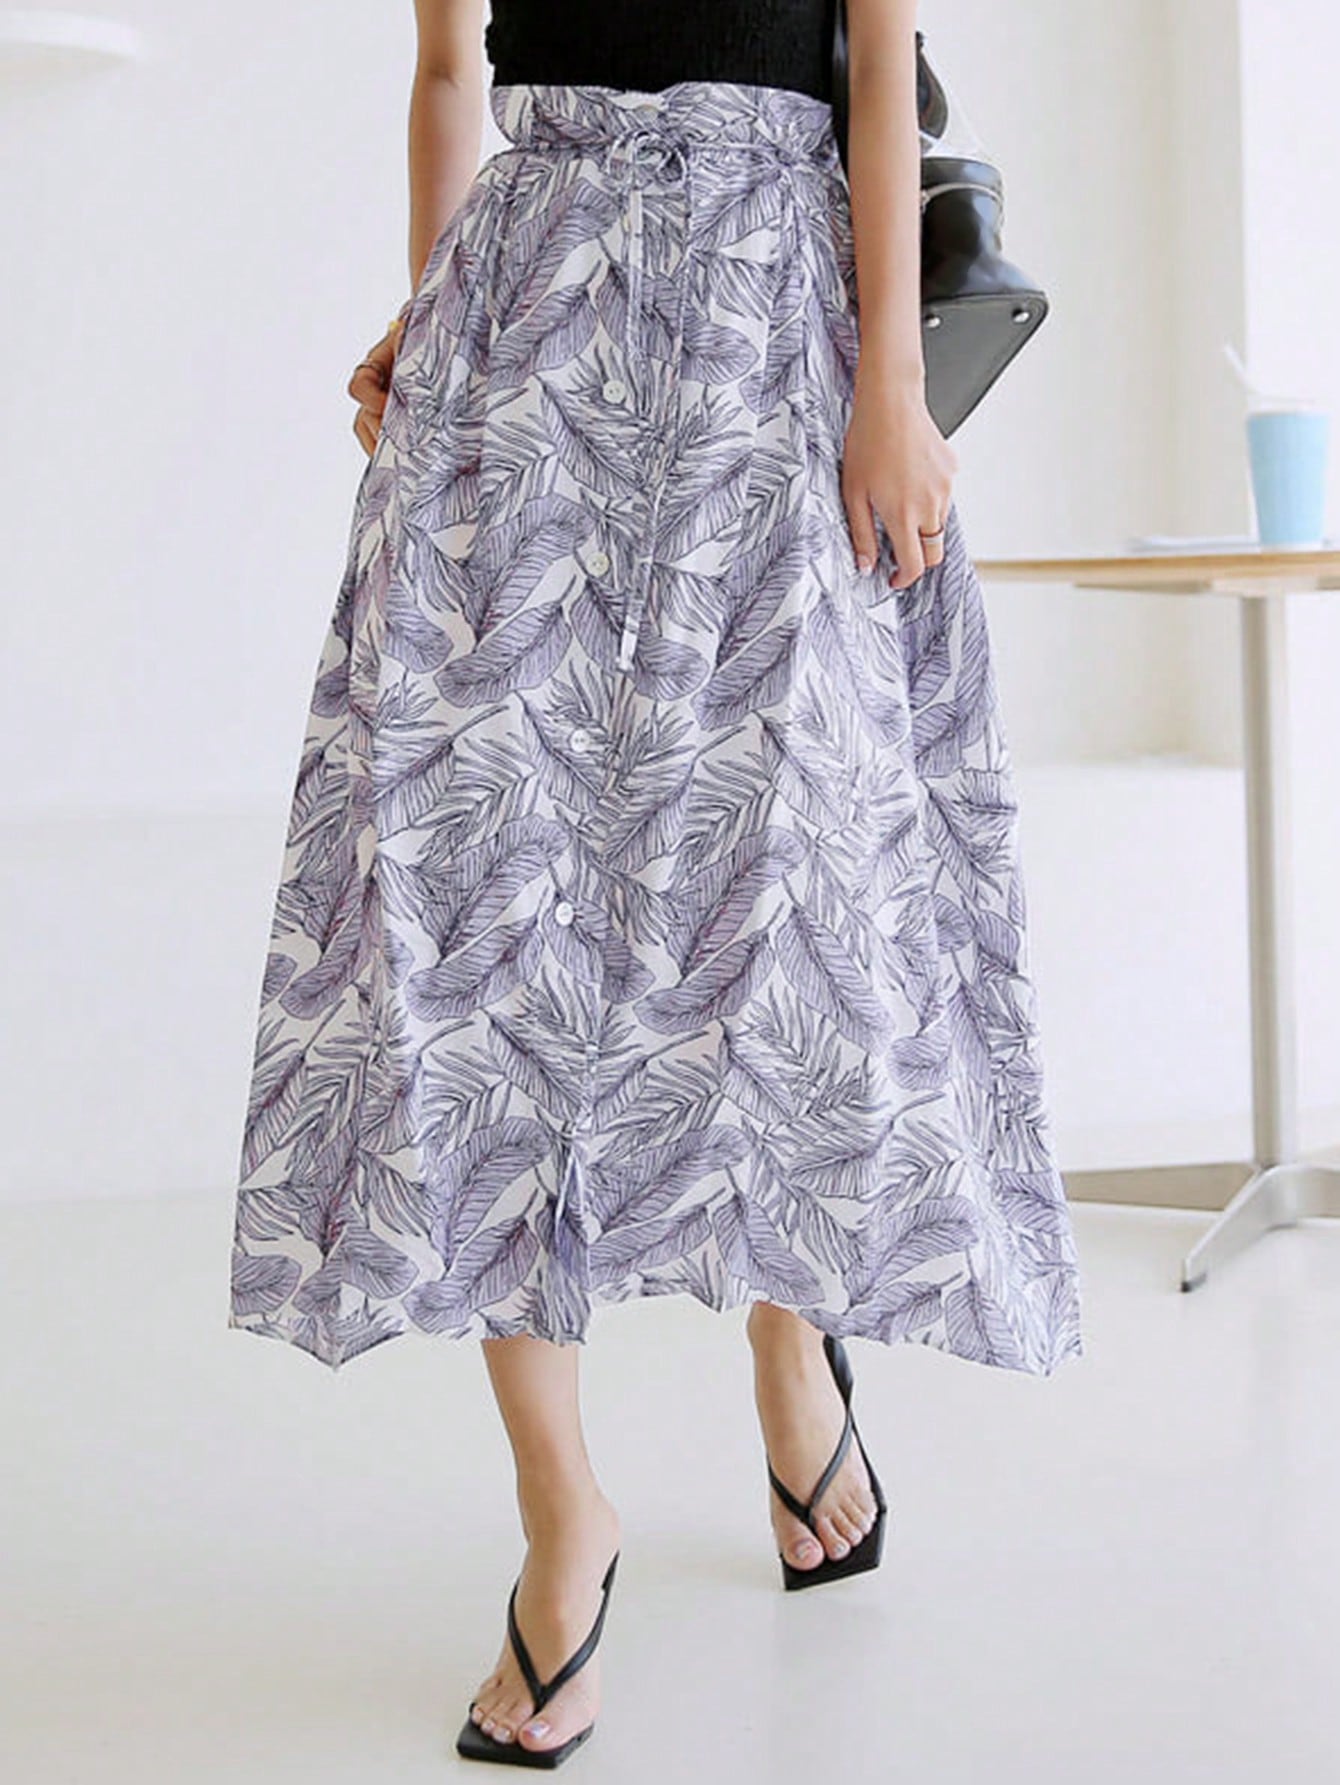 Women's Plant Printed A-Line Skirt